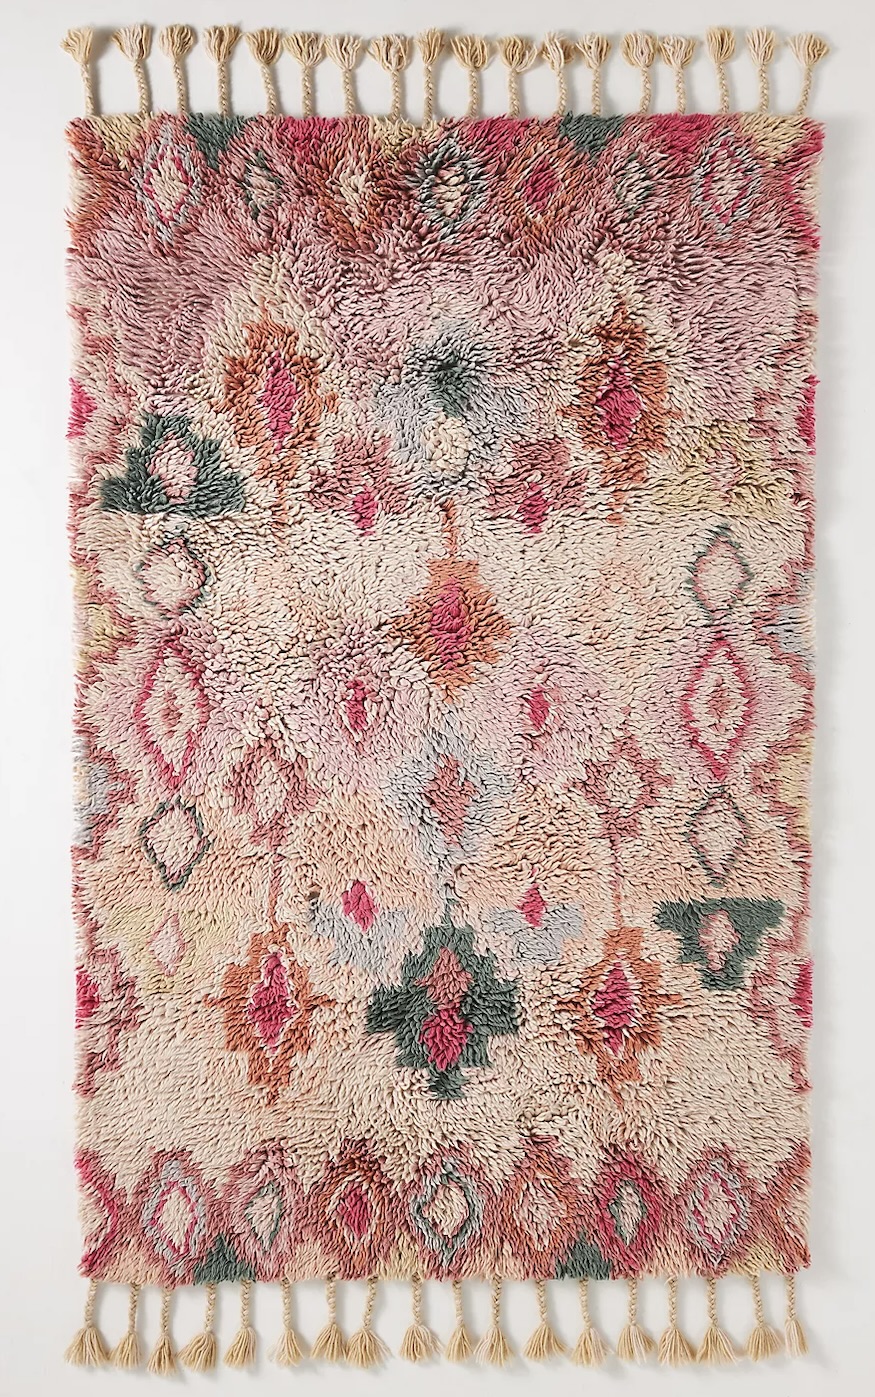 hand tufted pink rug from Anthropologie